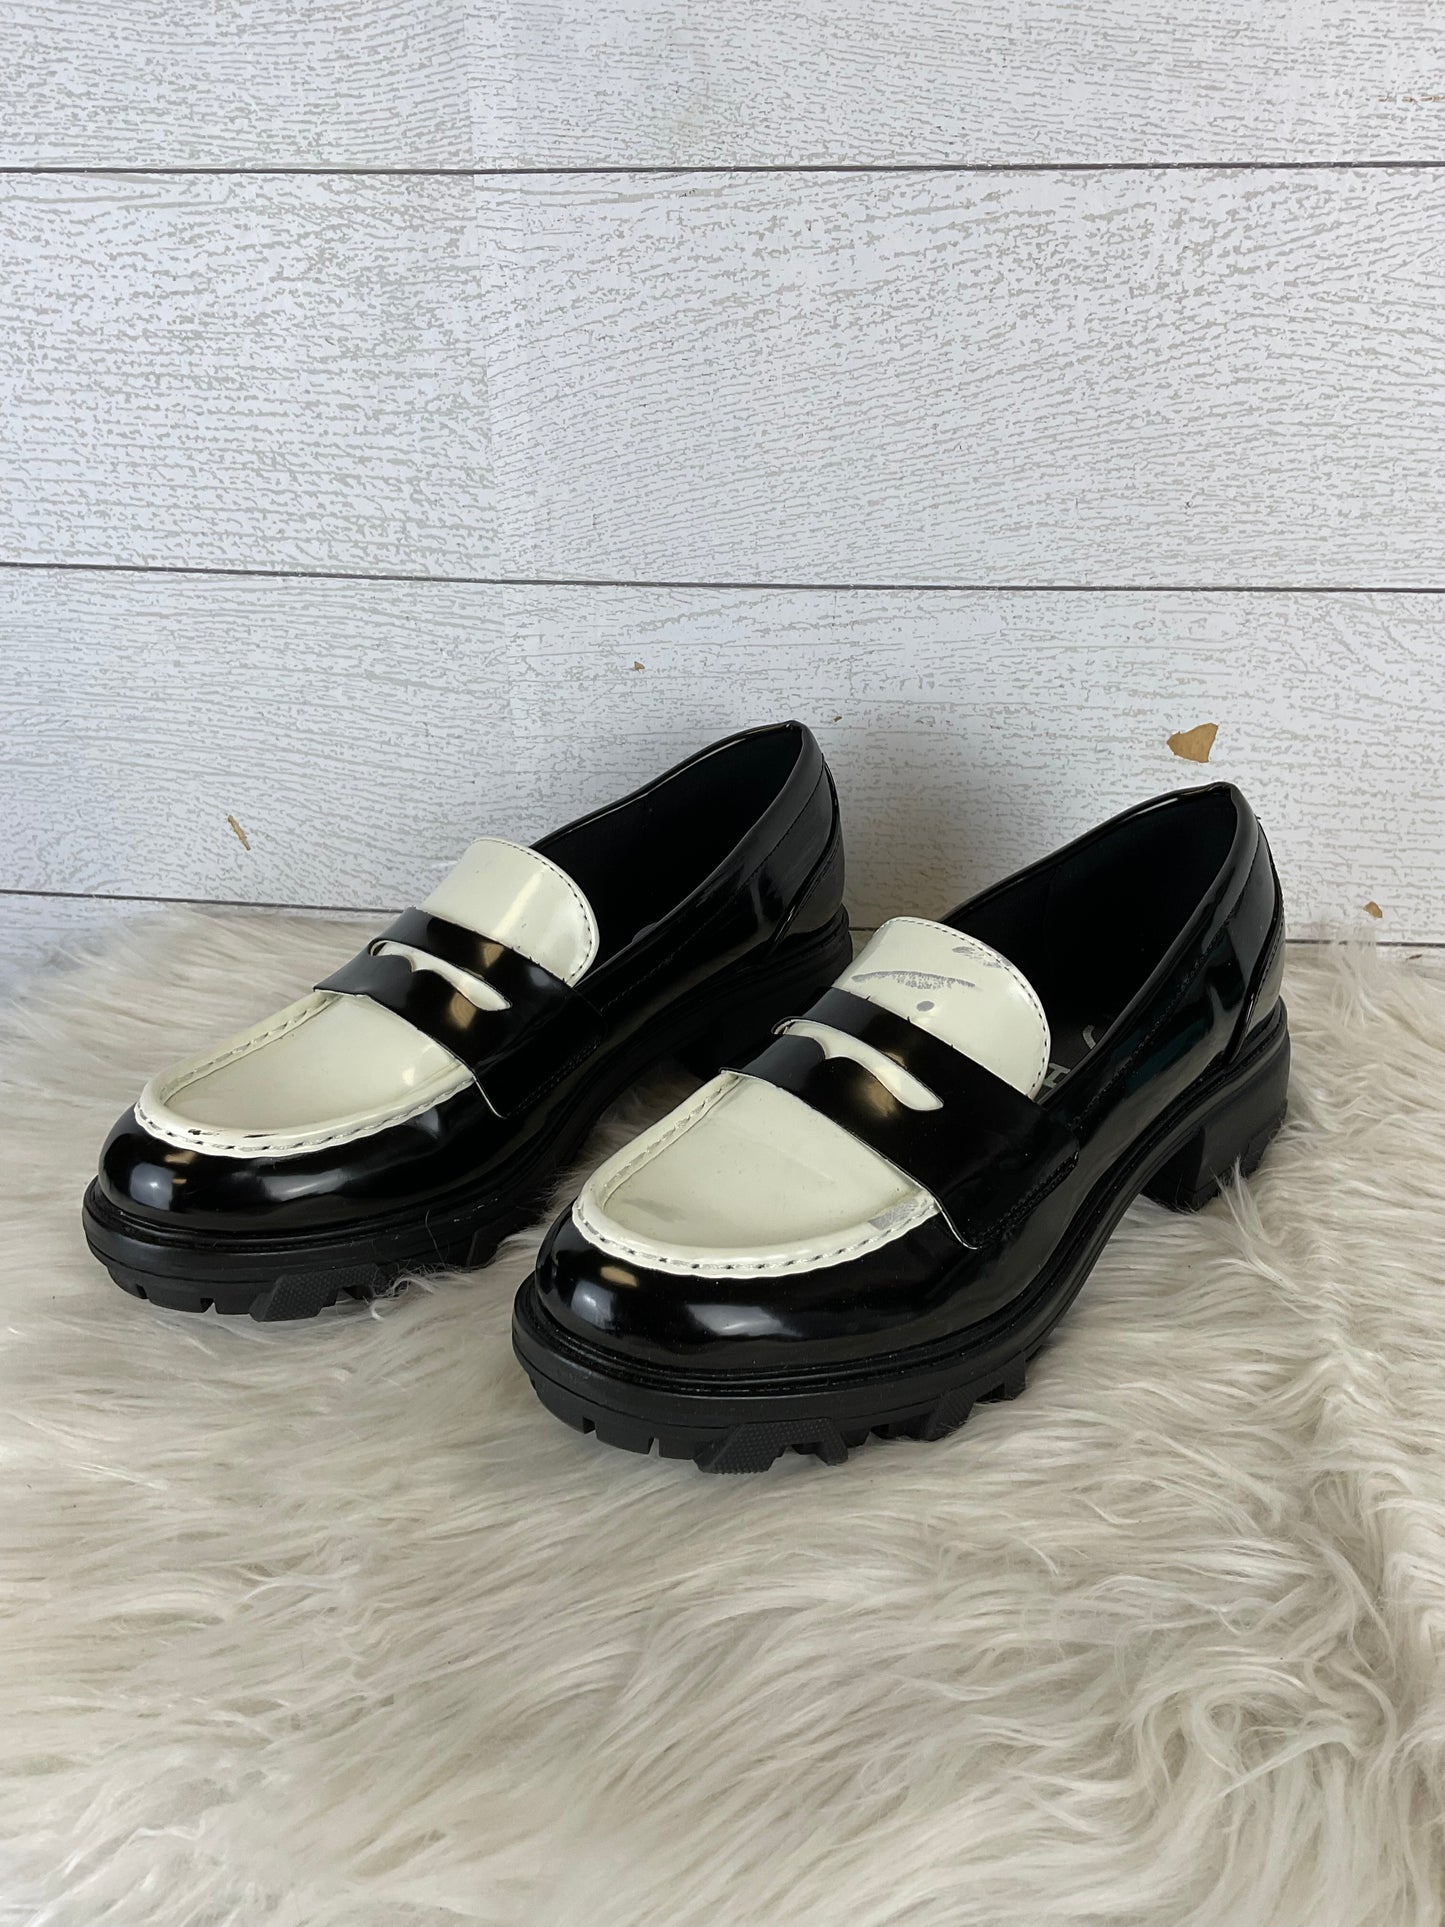 Shoes Flats Loafer Oxford By Unisa  Size: 8.5